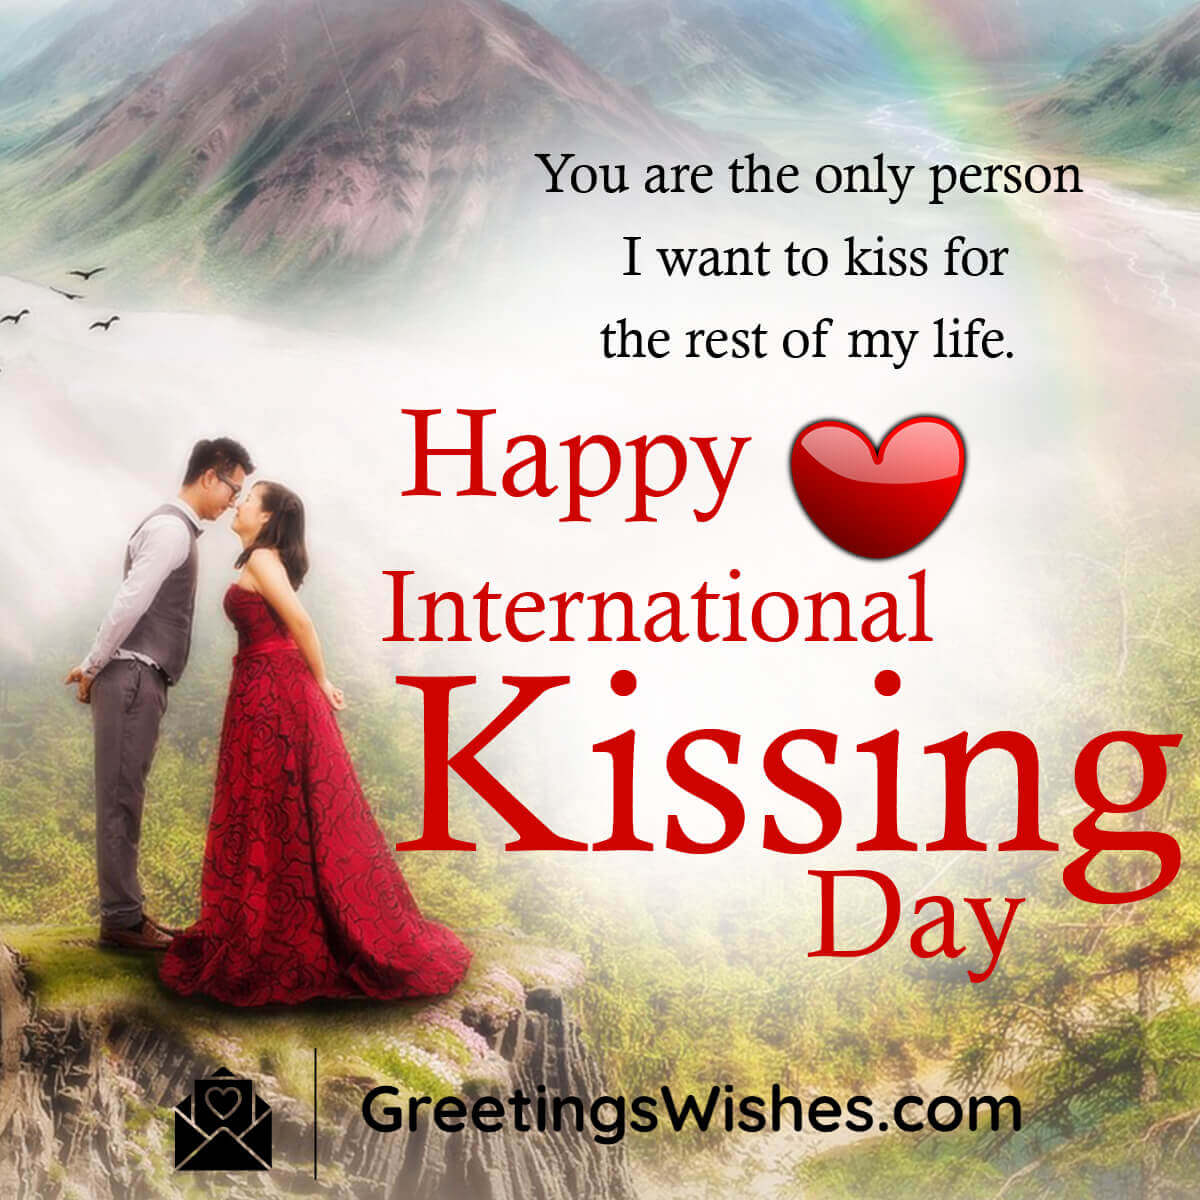 International Kissing Day Wishes